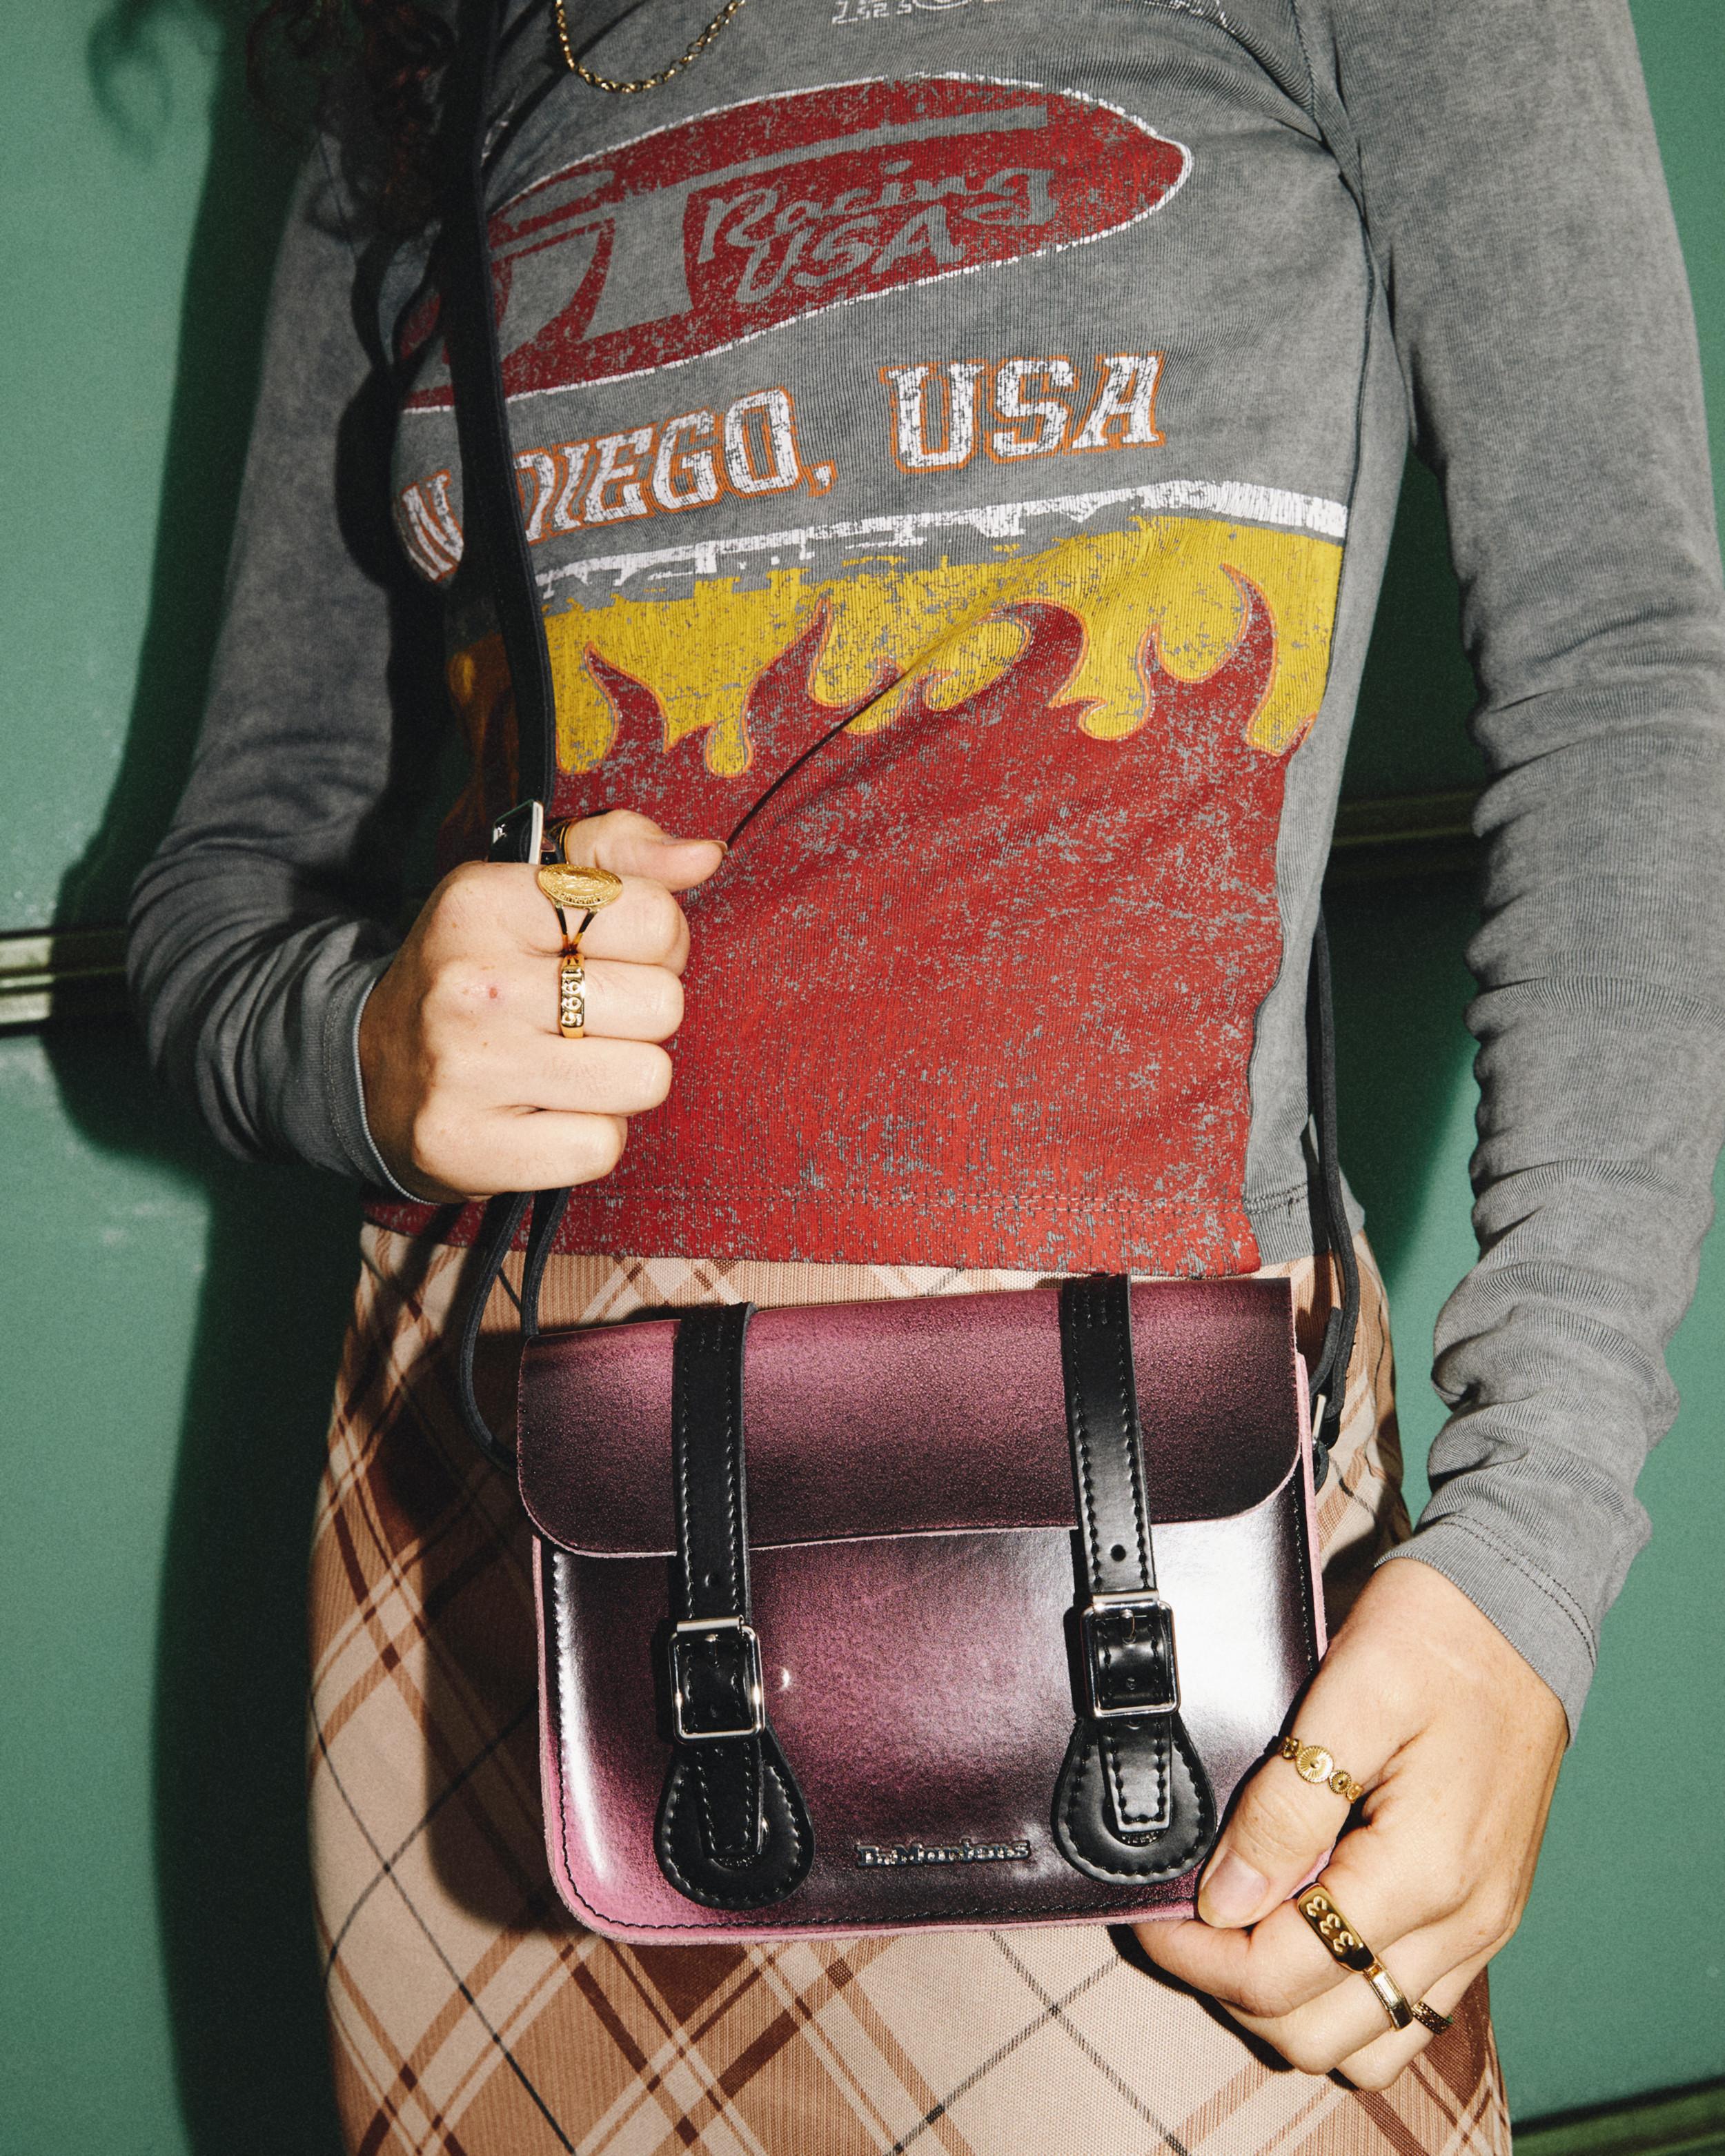 7 Inch Distressed Look Leather Crossbody Bag in Black+Fondant Pink